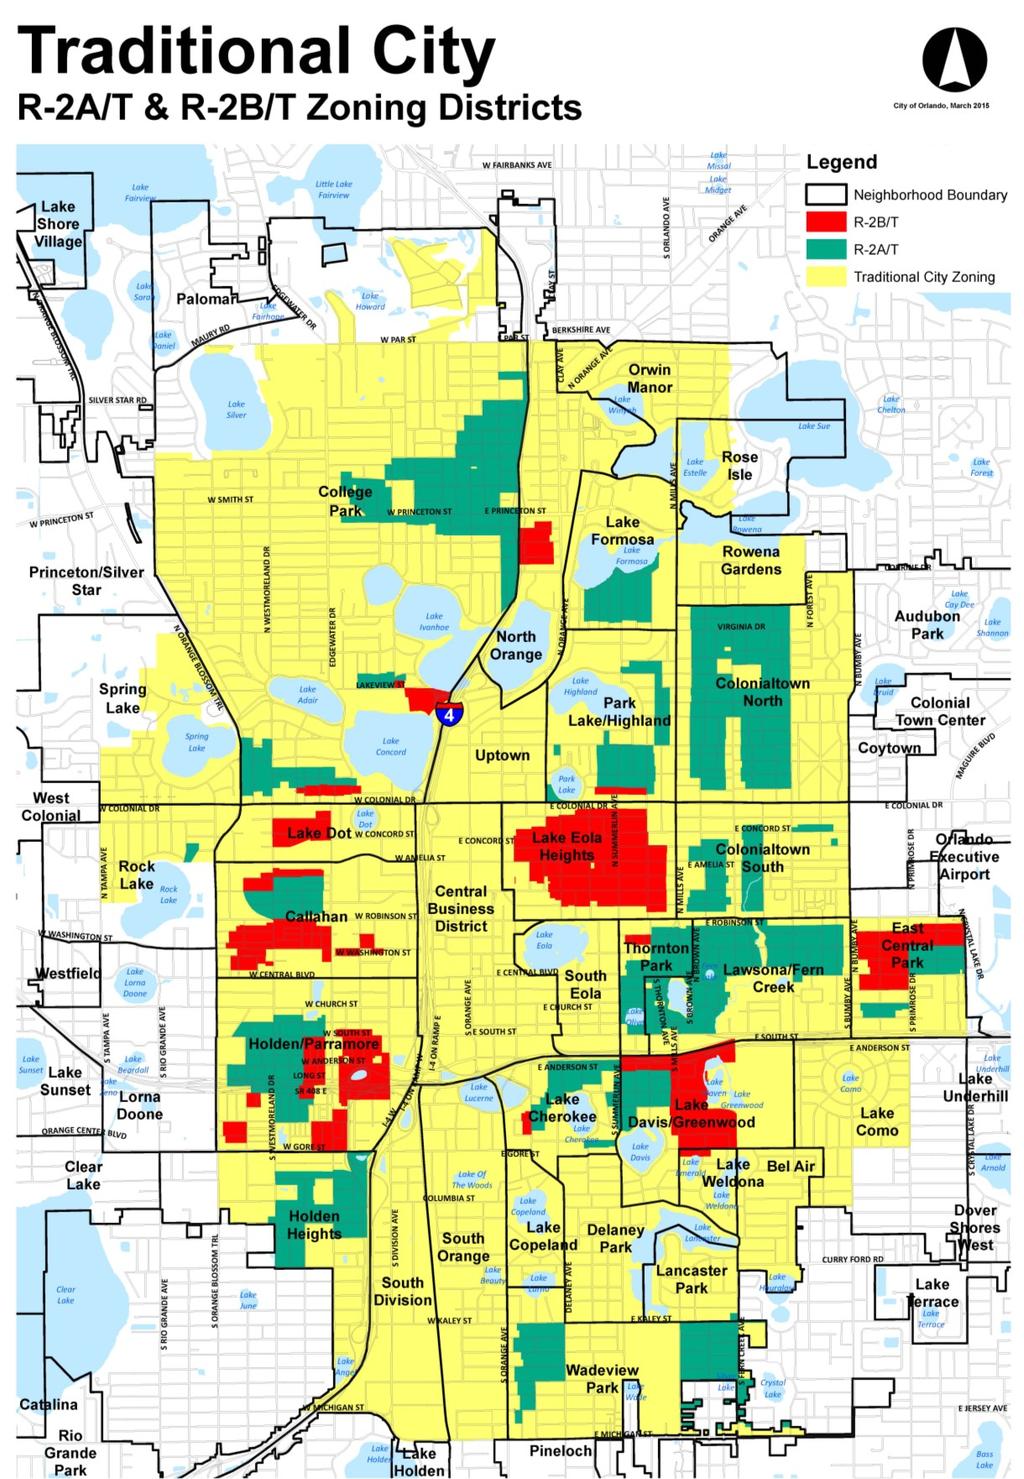 Page 2 E X I S T I N G C ODE R E Q U I R E M E N T S 1. Residential Zoning Districts The City has a number of residential zoning districts that create a hierarchy of allowable uses.